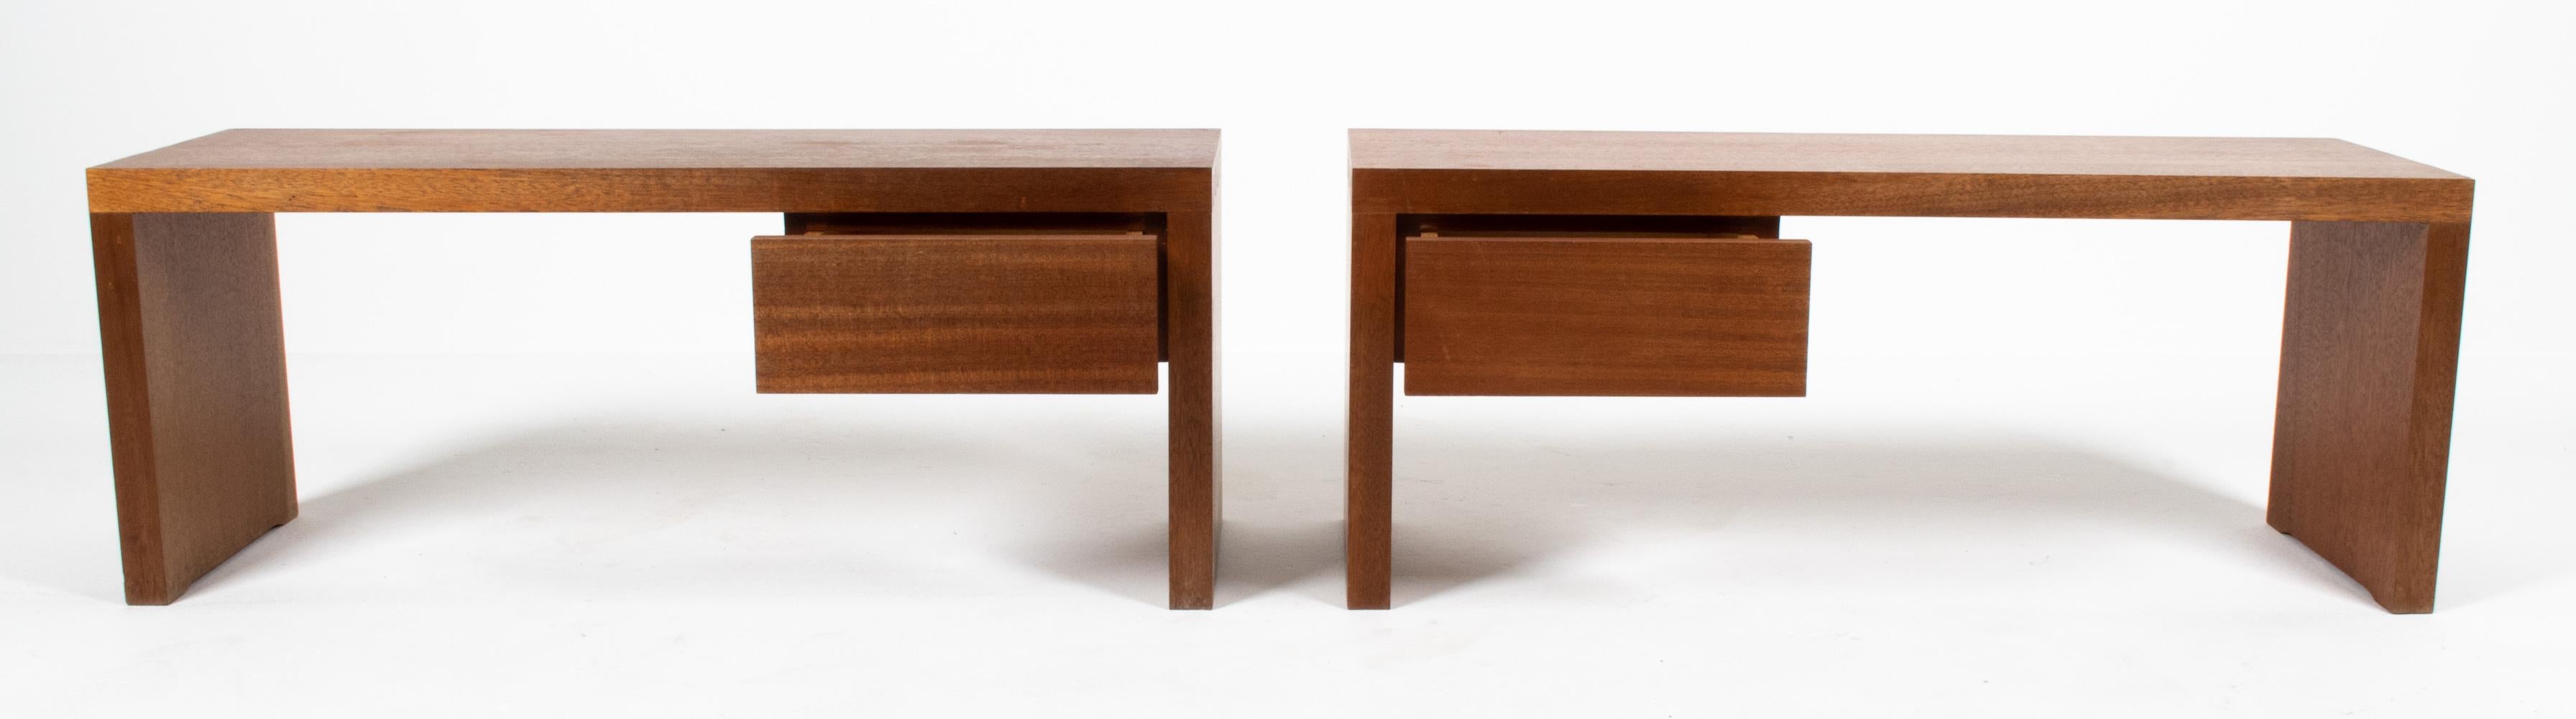 Pair of Mid-Century Modern Dovetailed Teak Nightstands or Benches For Sale 2